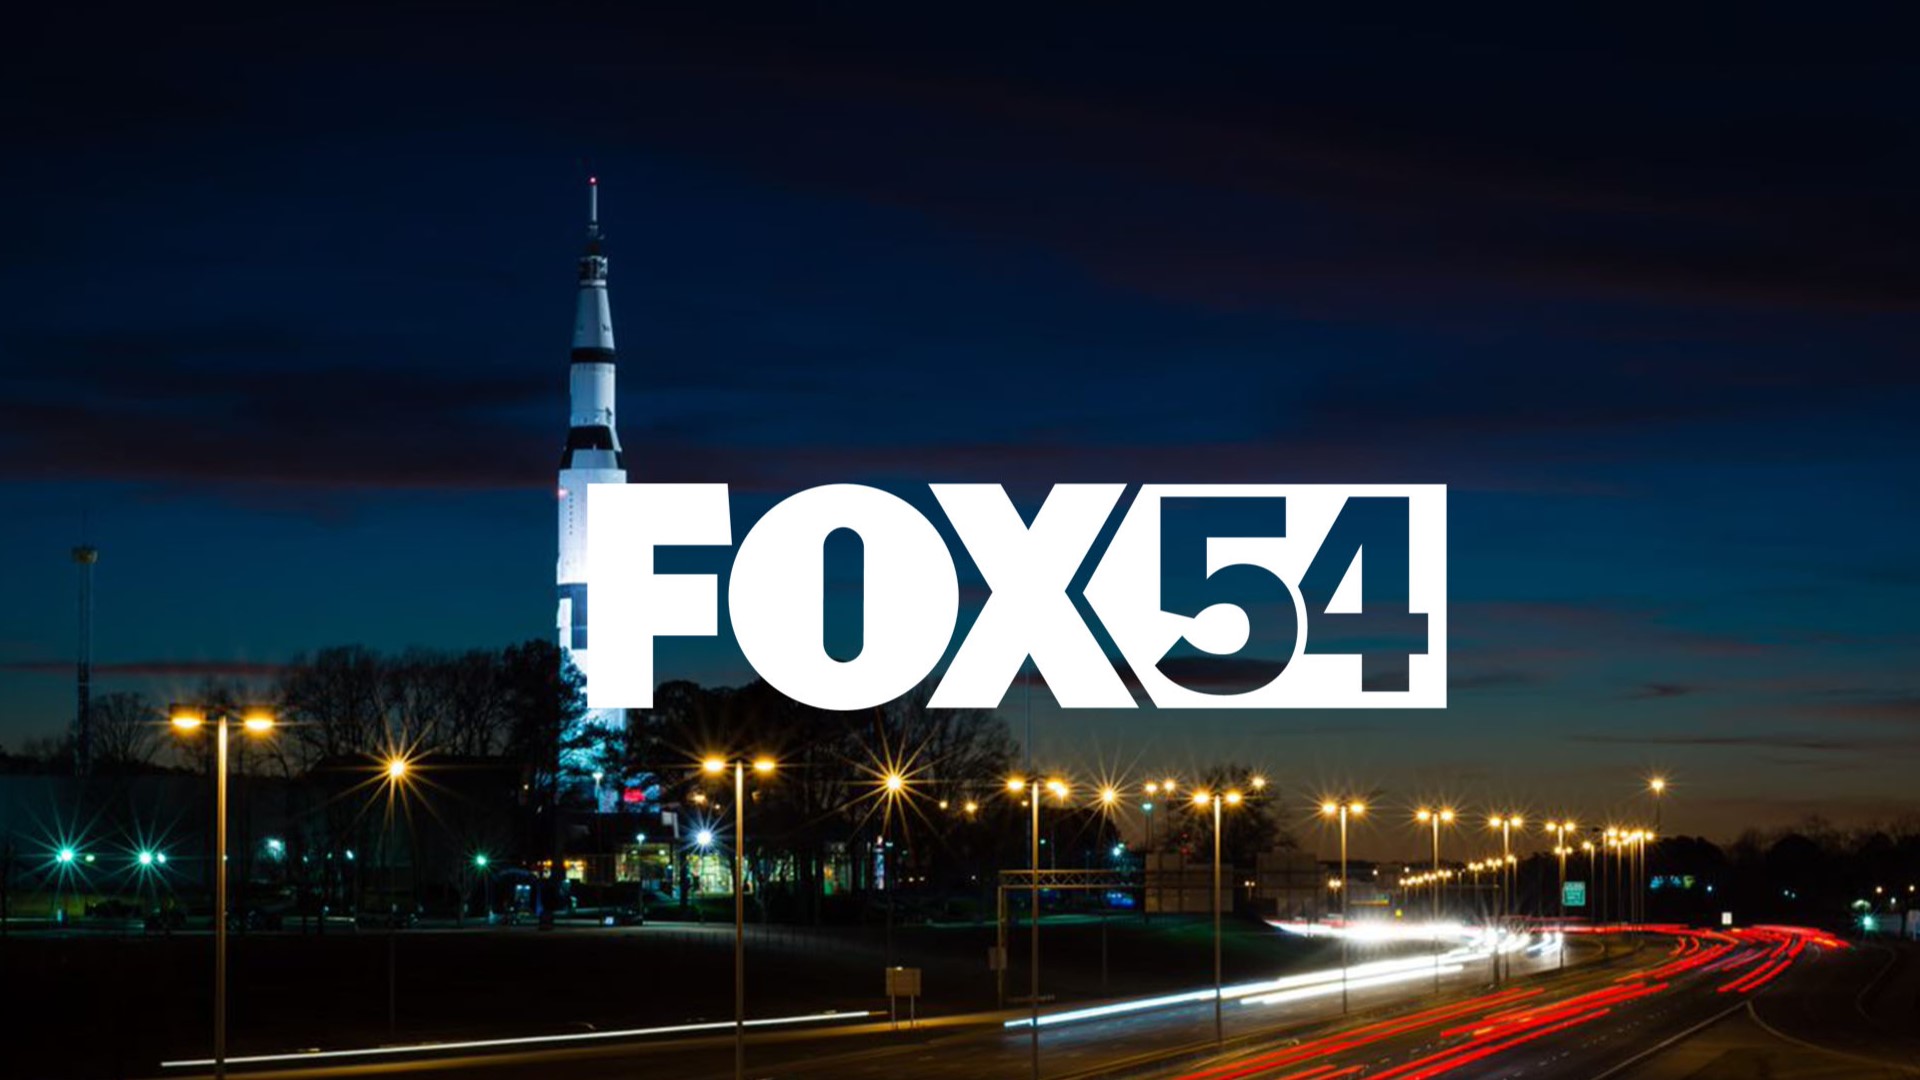 Our call letters are still WZDX, but we are returning to our roots. FOX54 is back.